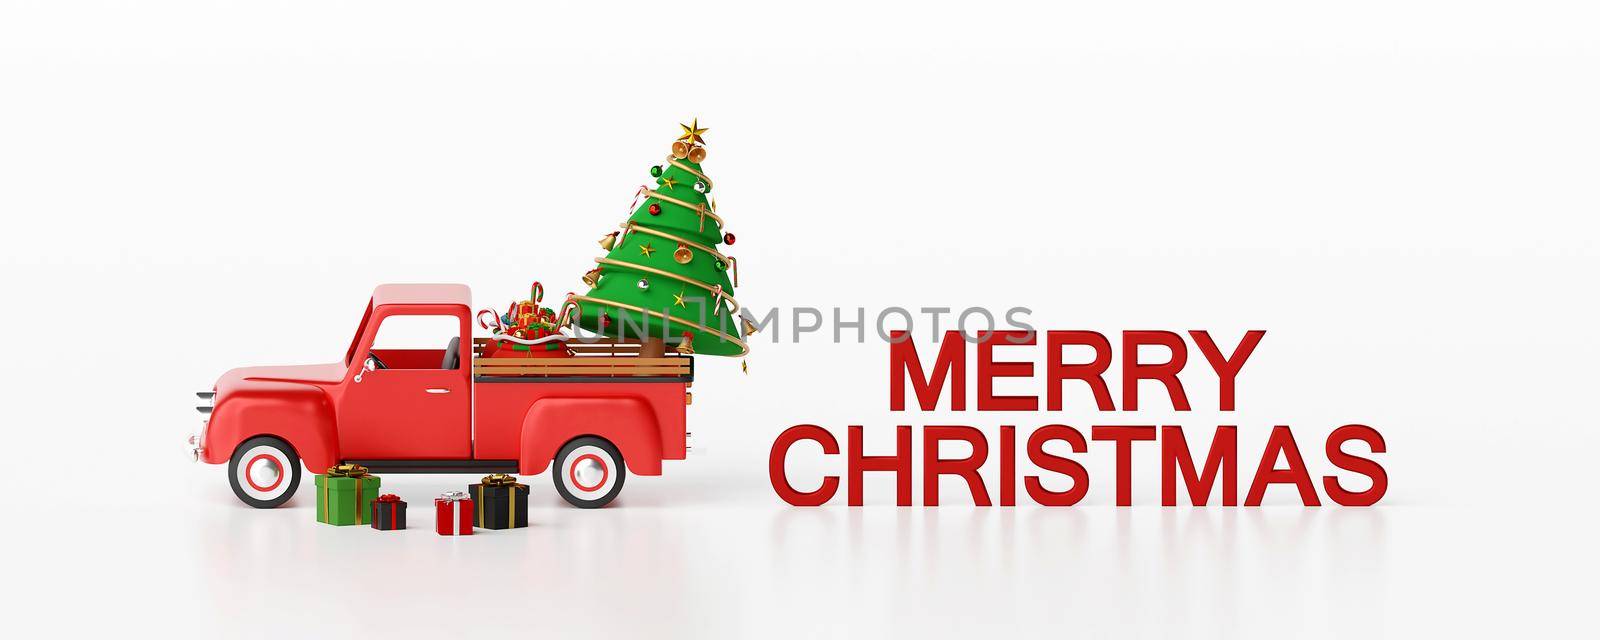 Christmas banner background of Christmas truck and gifts with text Merry Christmas, 3d rendering